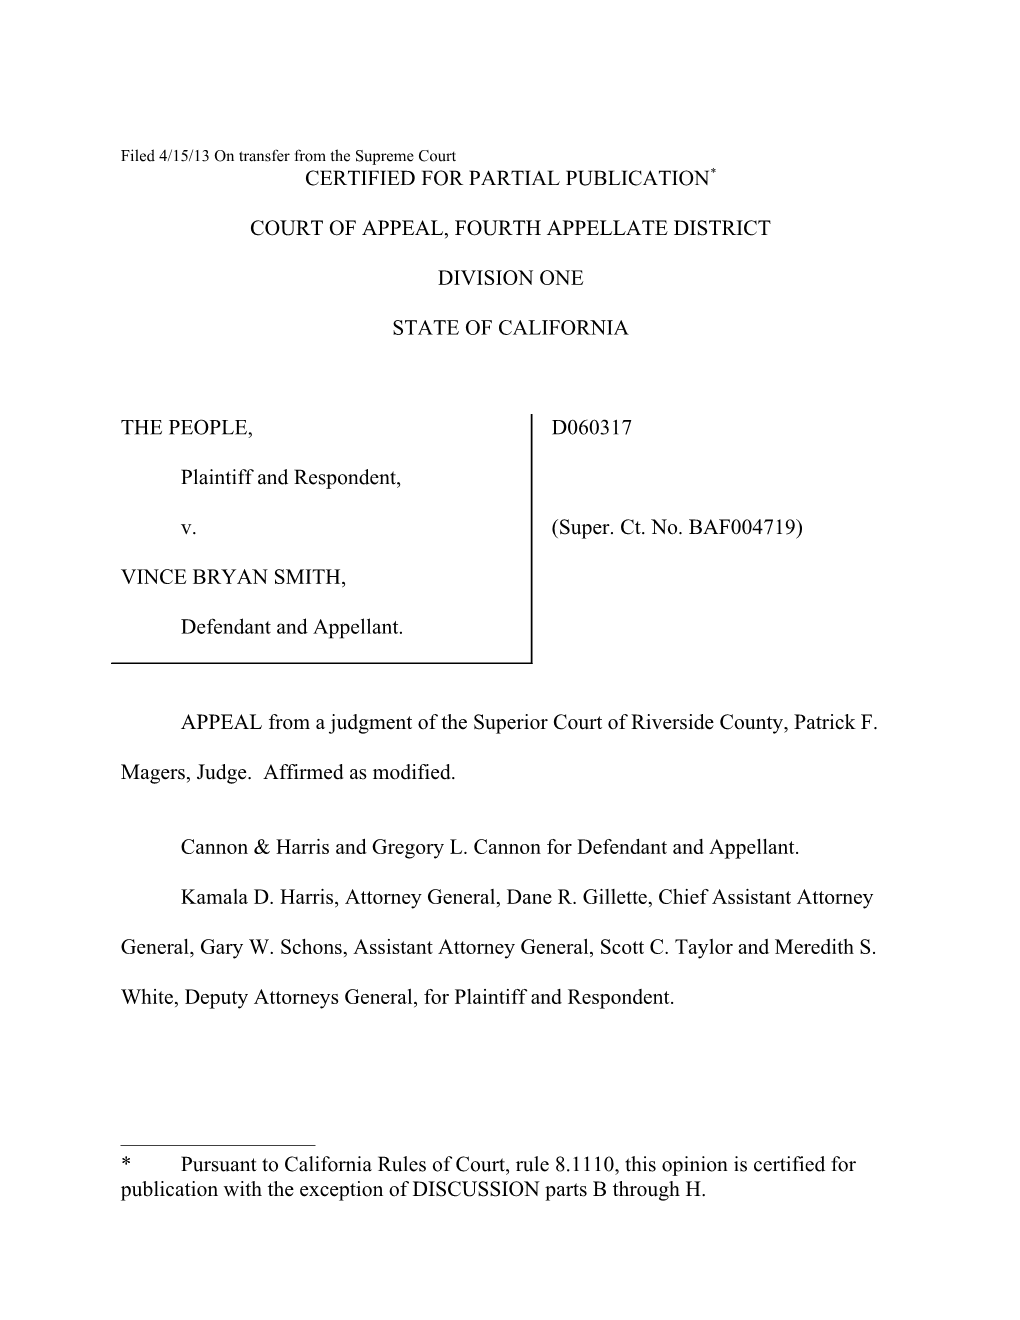 Filed 4/15/13 on Transfer from the Supreme Court